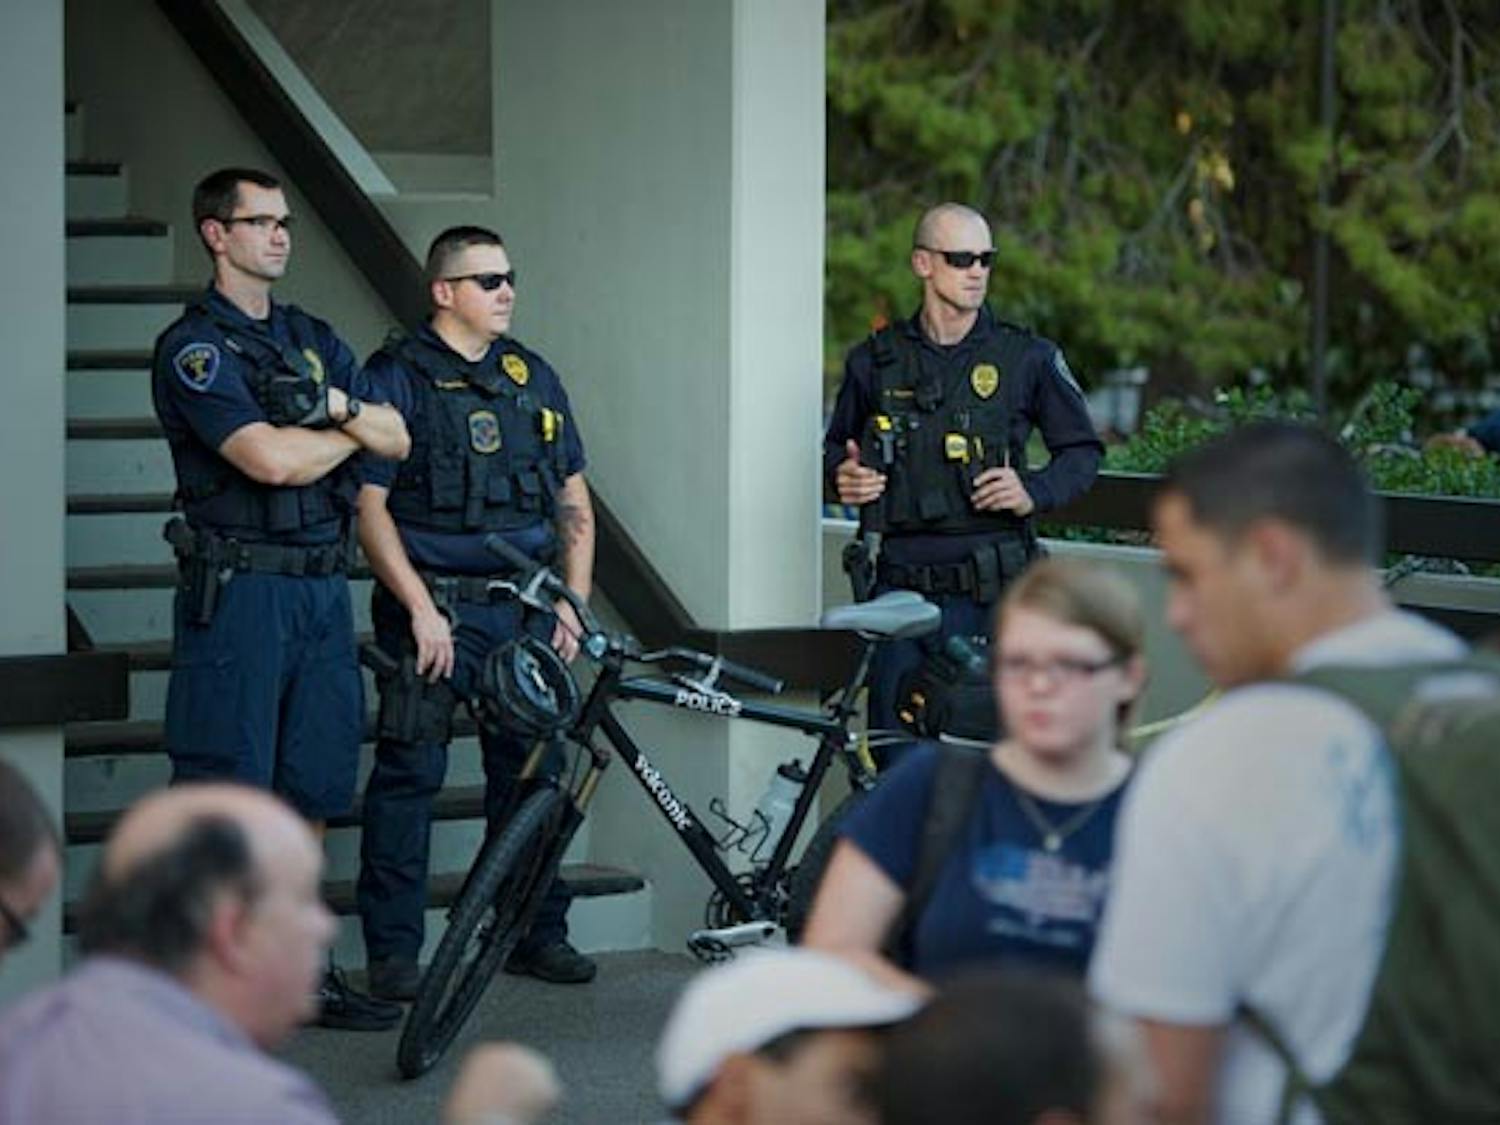 FALSE ALARM: Tempe police watch oer the crowd gathered in front of the BAC building, during the lock-down of the W.P. Carey schools after a reported bomb threat. (Photo by Michael Arellano)